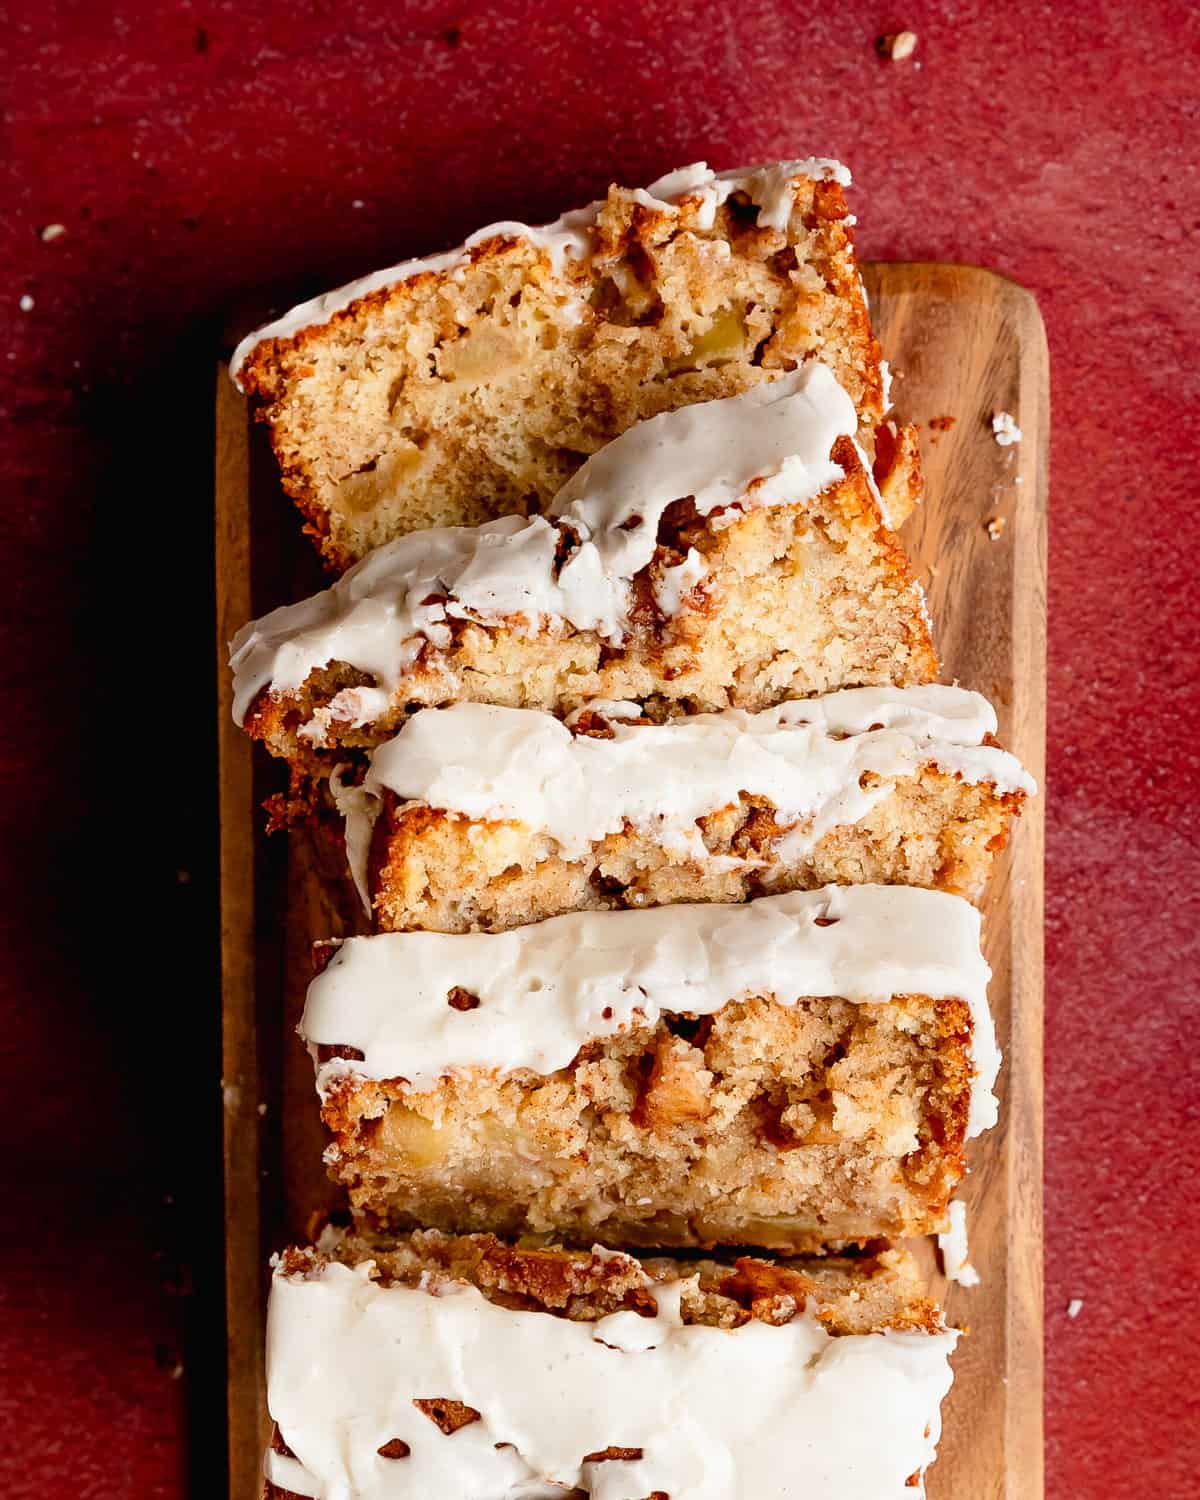 Apple fritter bread is a soft, moist and flavor packed apple quick bread with brown sugar cinnamon apples swirled throughout. The spiced apple fritter topping is also swirled on the apple bread giving you cozy, caramelized apple chunks in every bite. Make this Amish apple bread truly decadent by topping it with an easy vanilla bean glaze. 